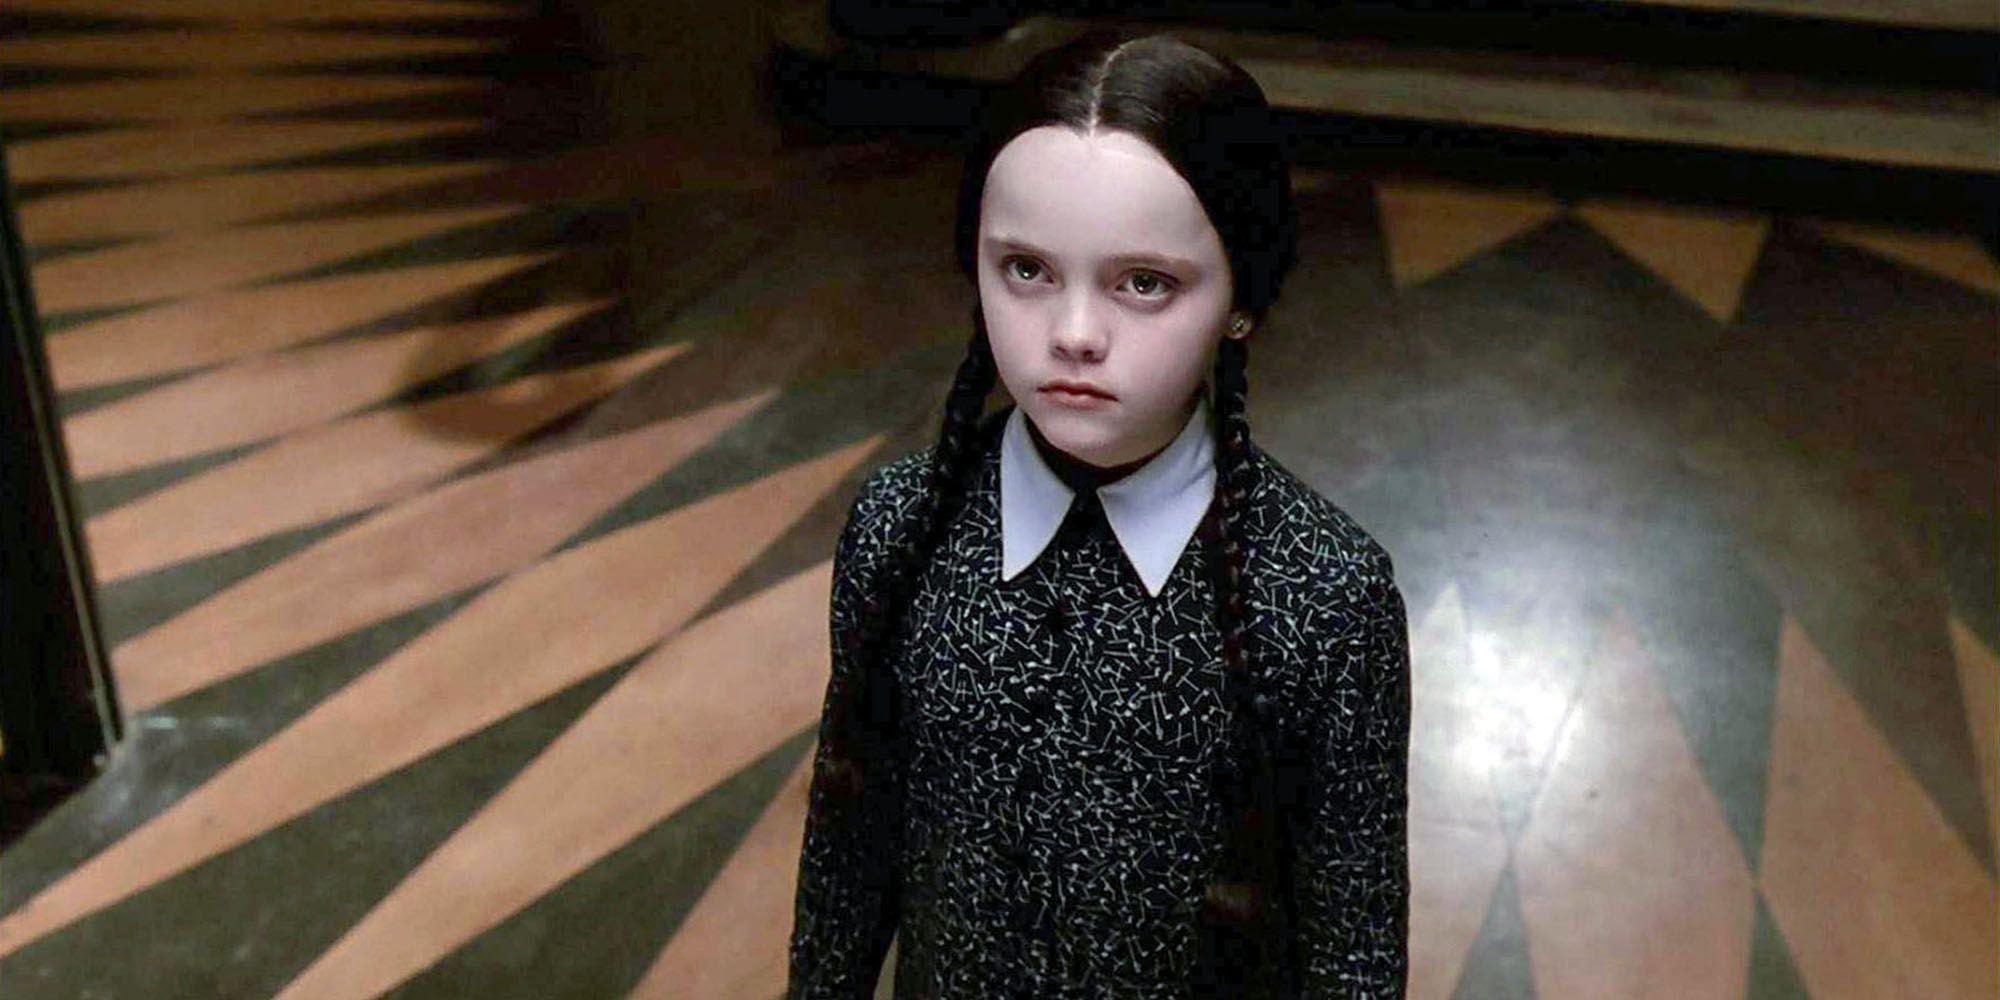 Wednesday Addams sulks by herself in The Addams Family